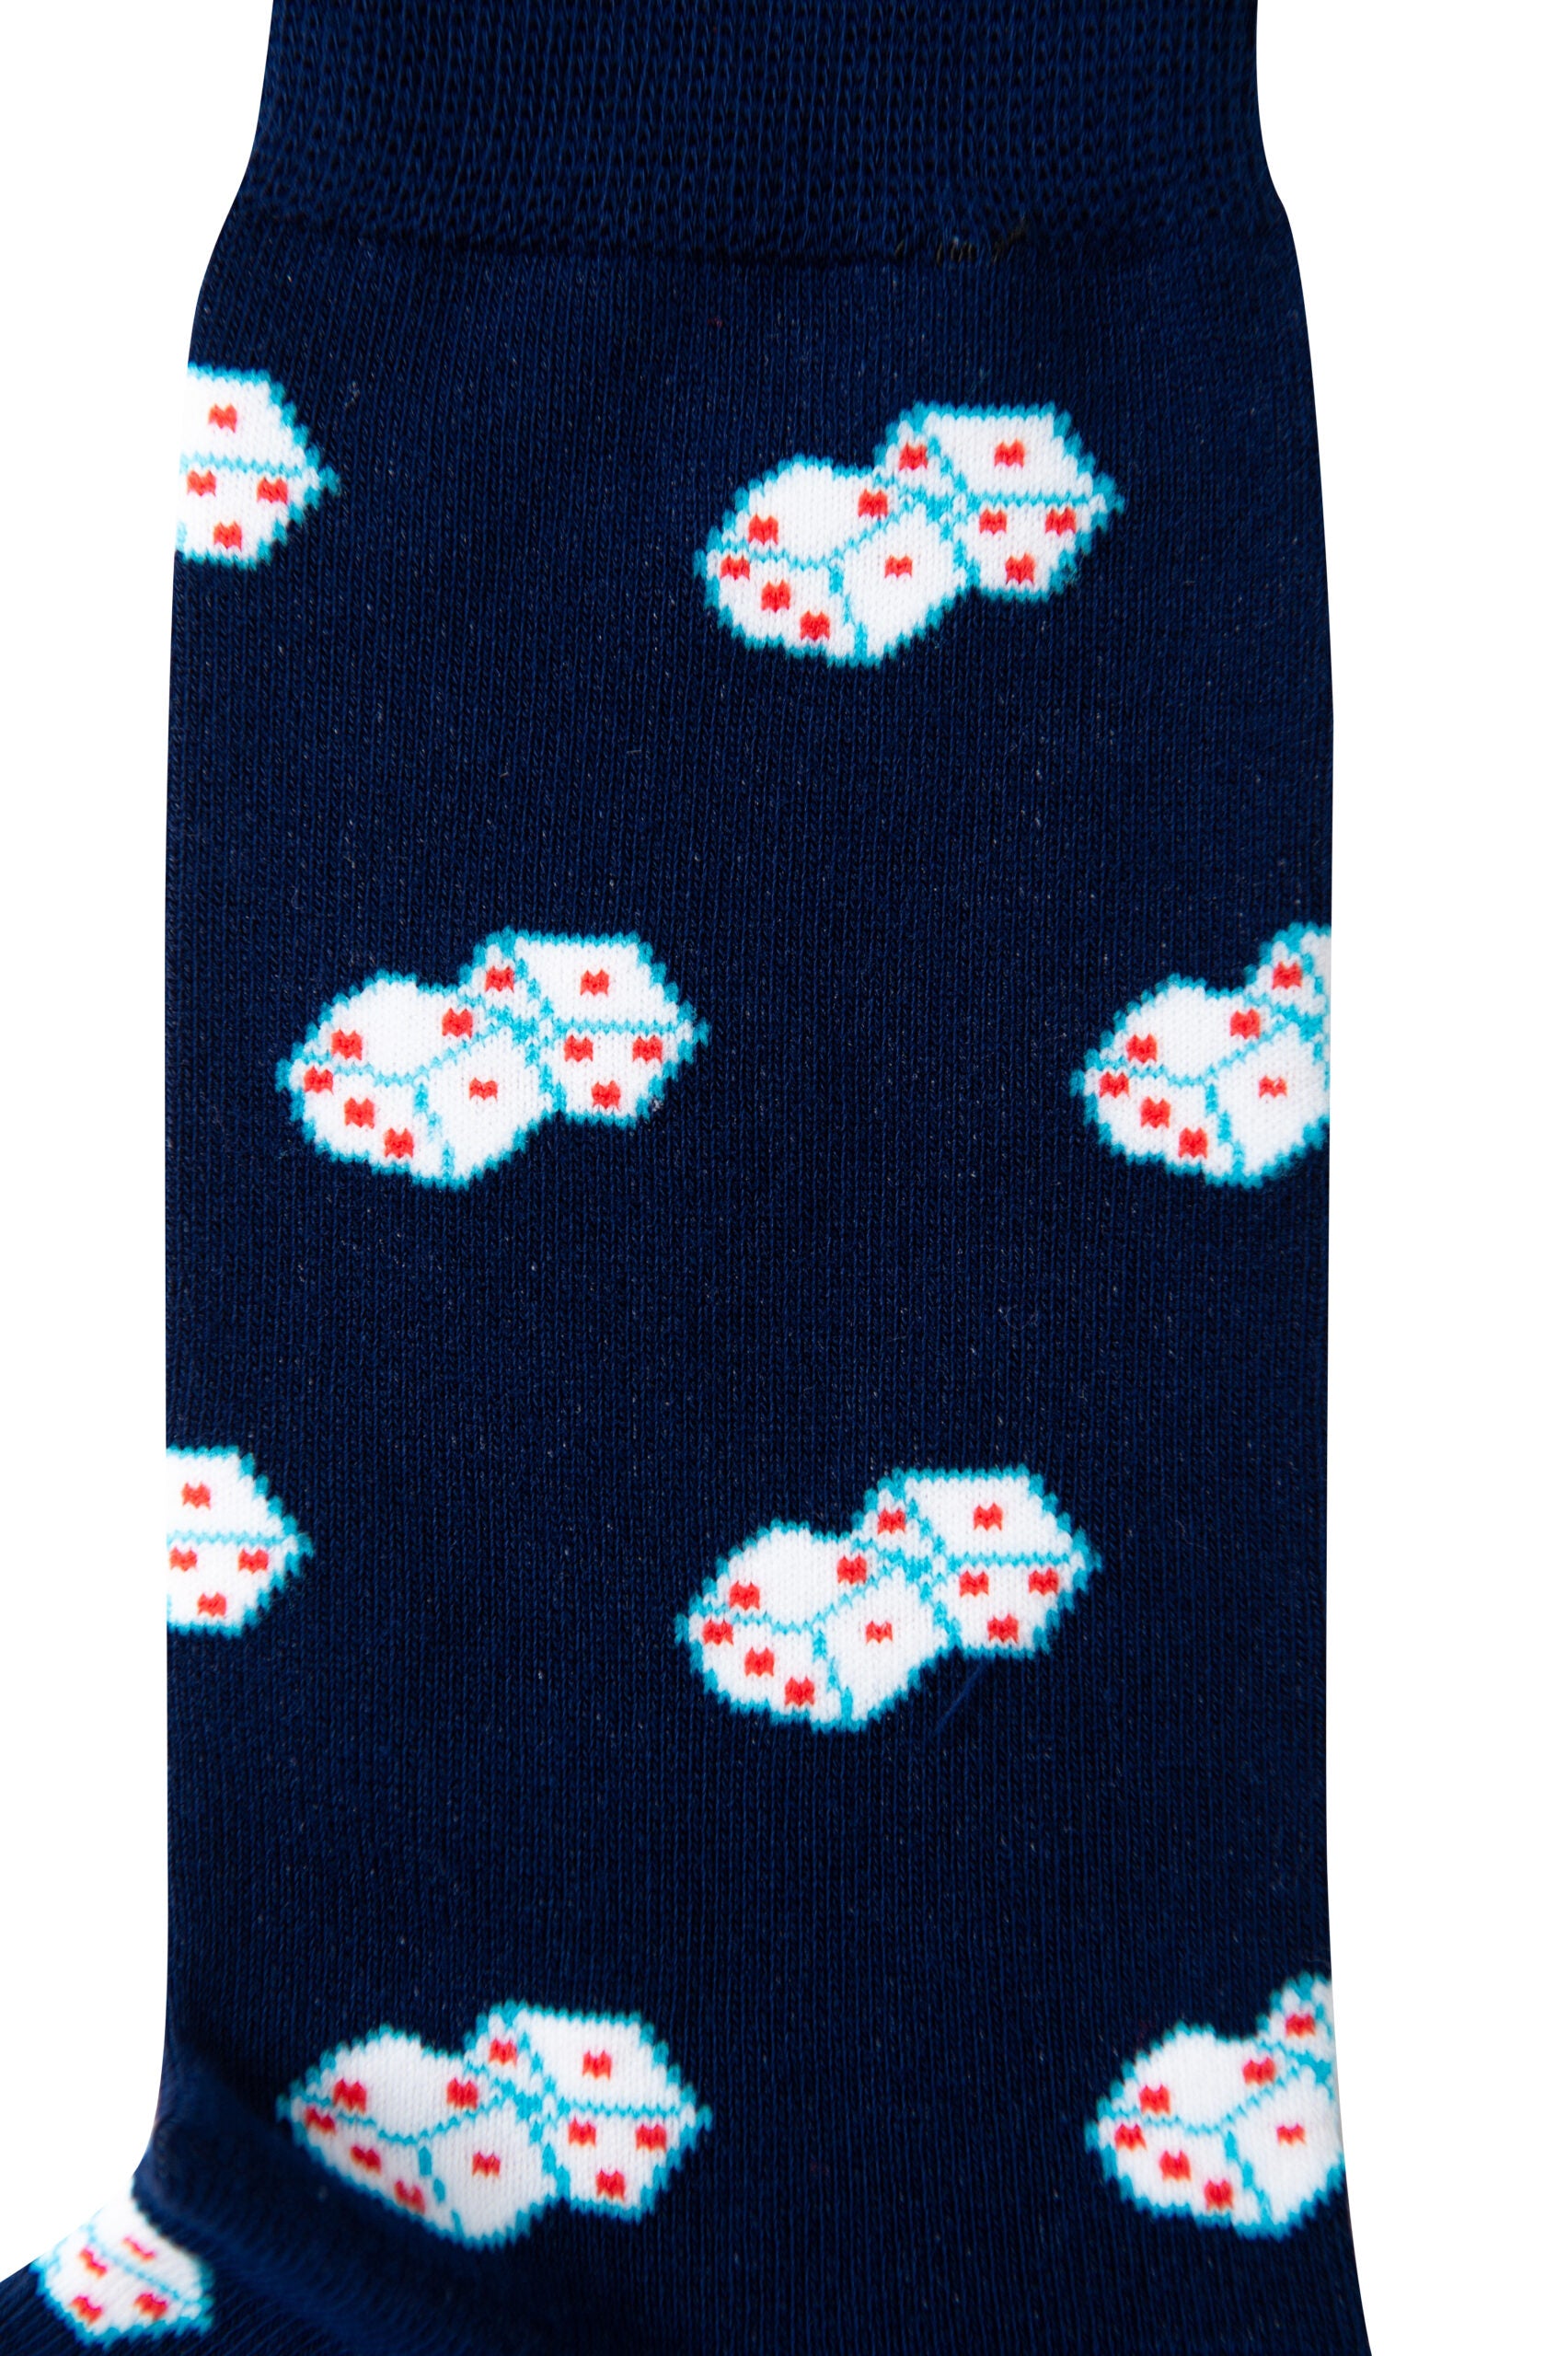 A pair of navy socks with Dice Socks on them.